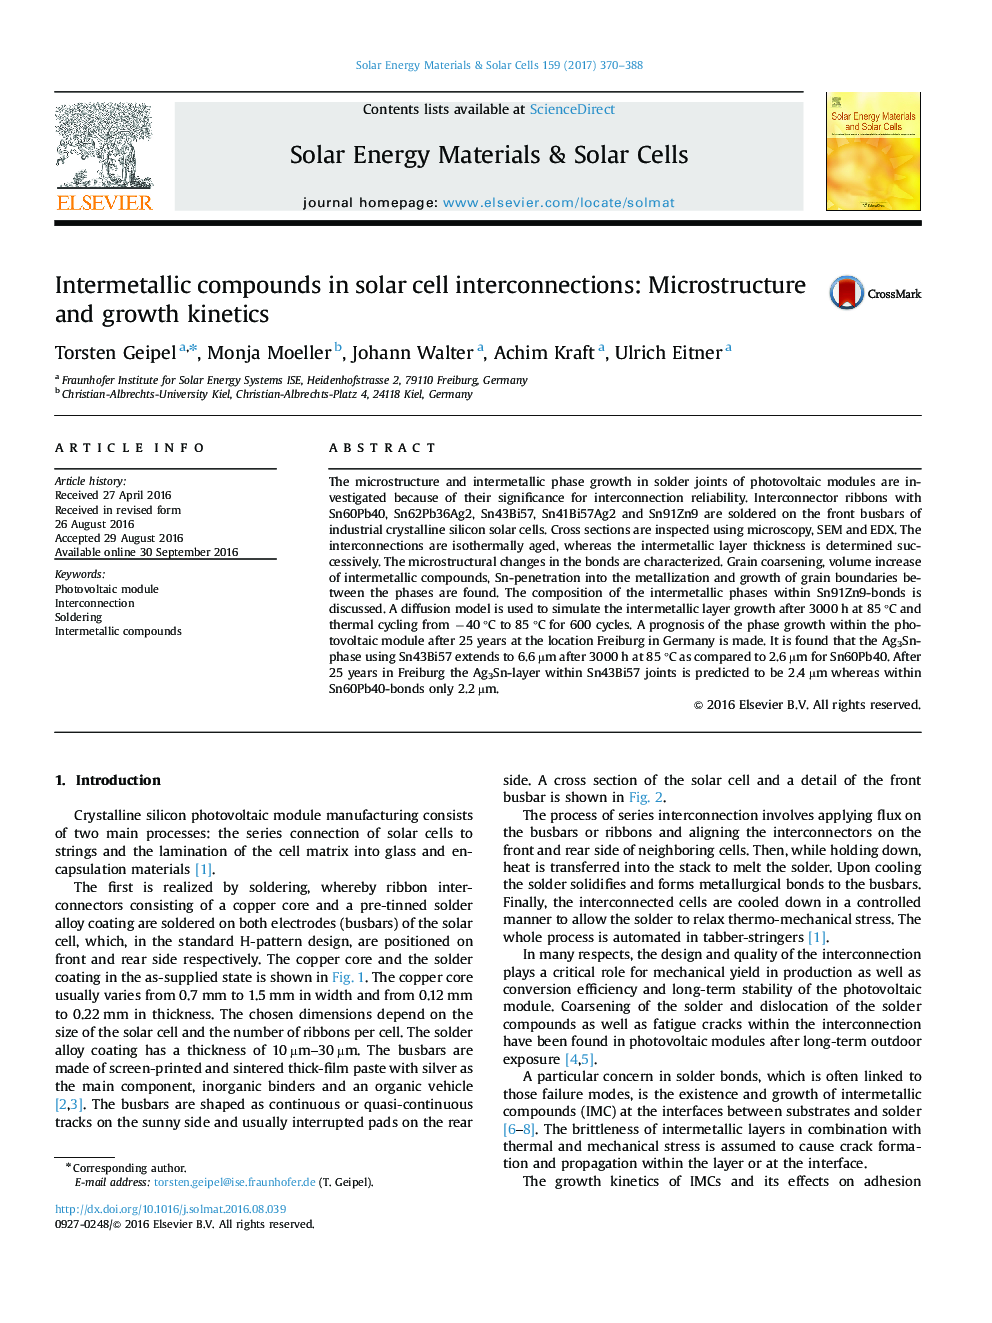 Intermetallic compounds in solar cell interconnections: Microstructure and growth kinetics